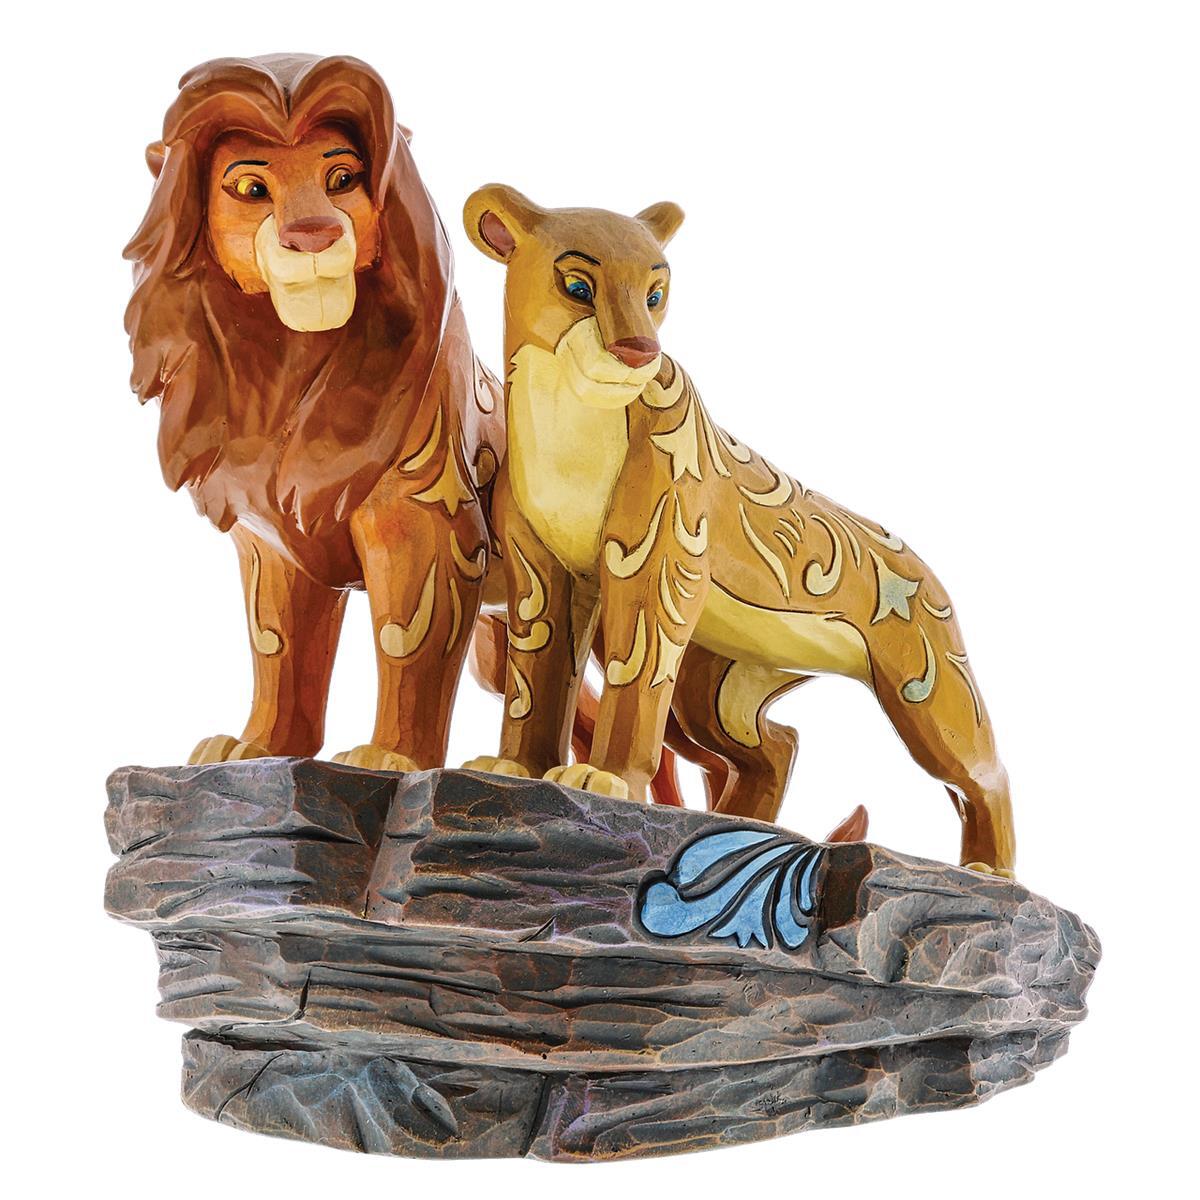 Le Roi Lion Carved In Stone - Disney Traditions